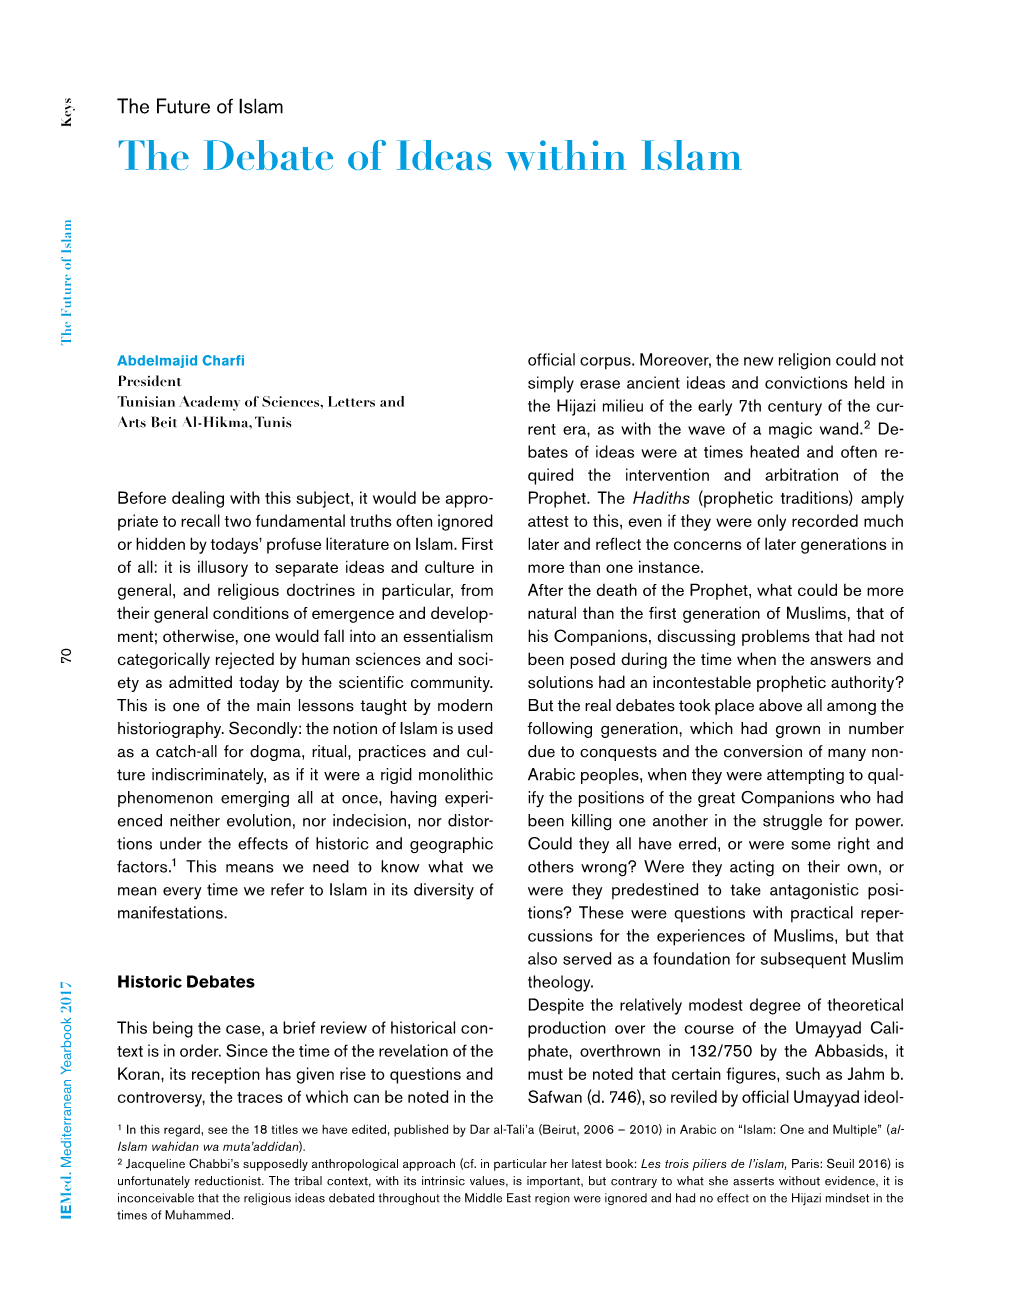 The Debate of Ideas Within Islam